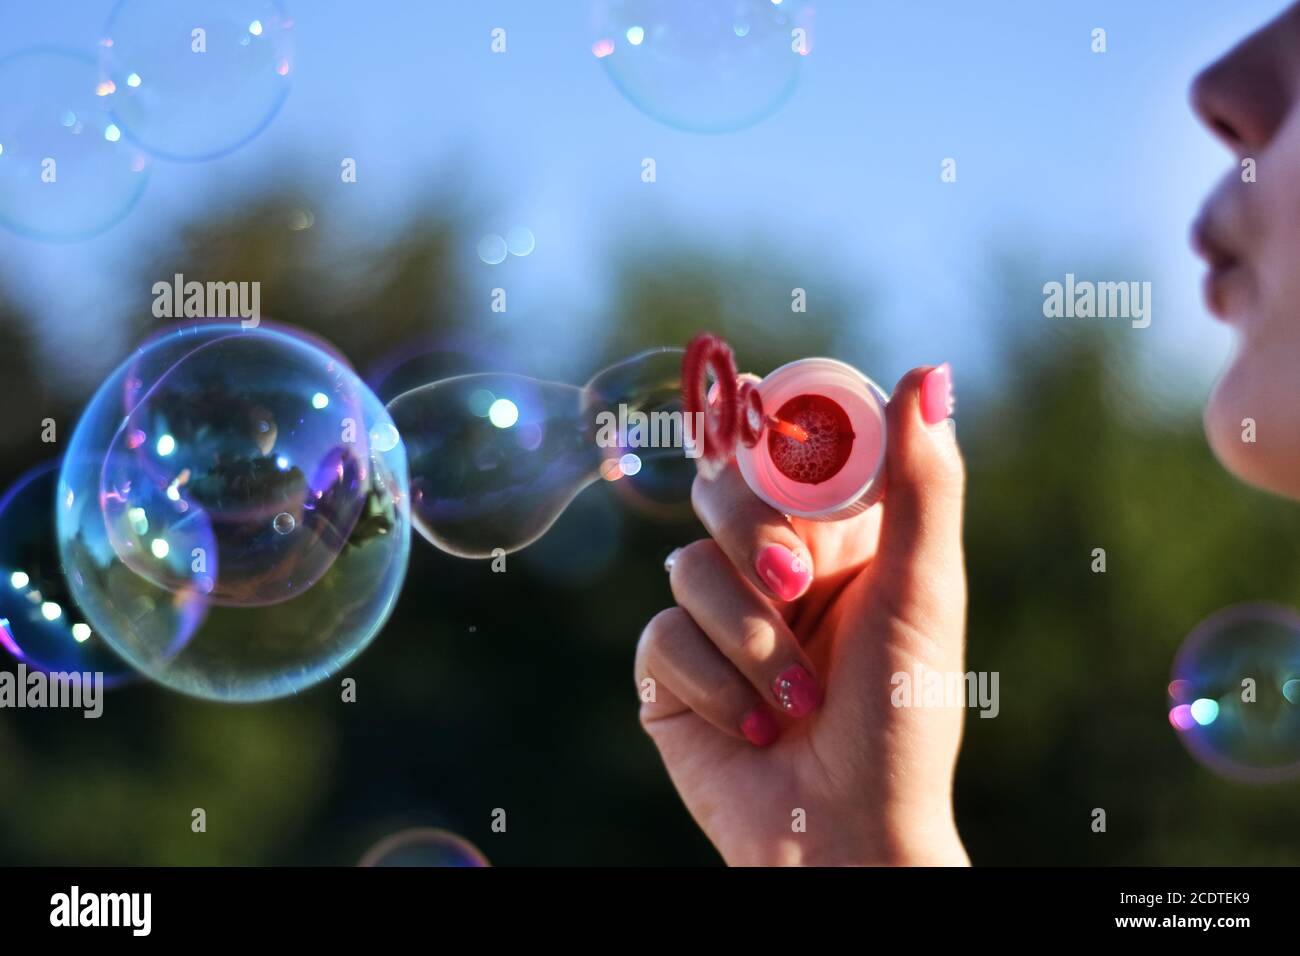 Young woman blowing soap bubbles outdoor in the park on summer sunset. Girl holding tool for bubbles in hand. Happiness in nature concept Stock Photo